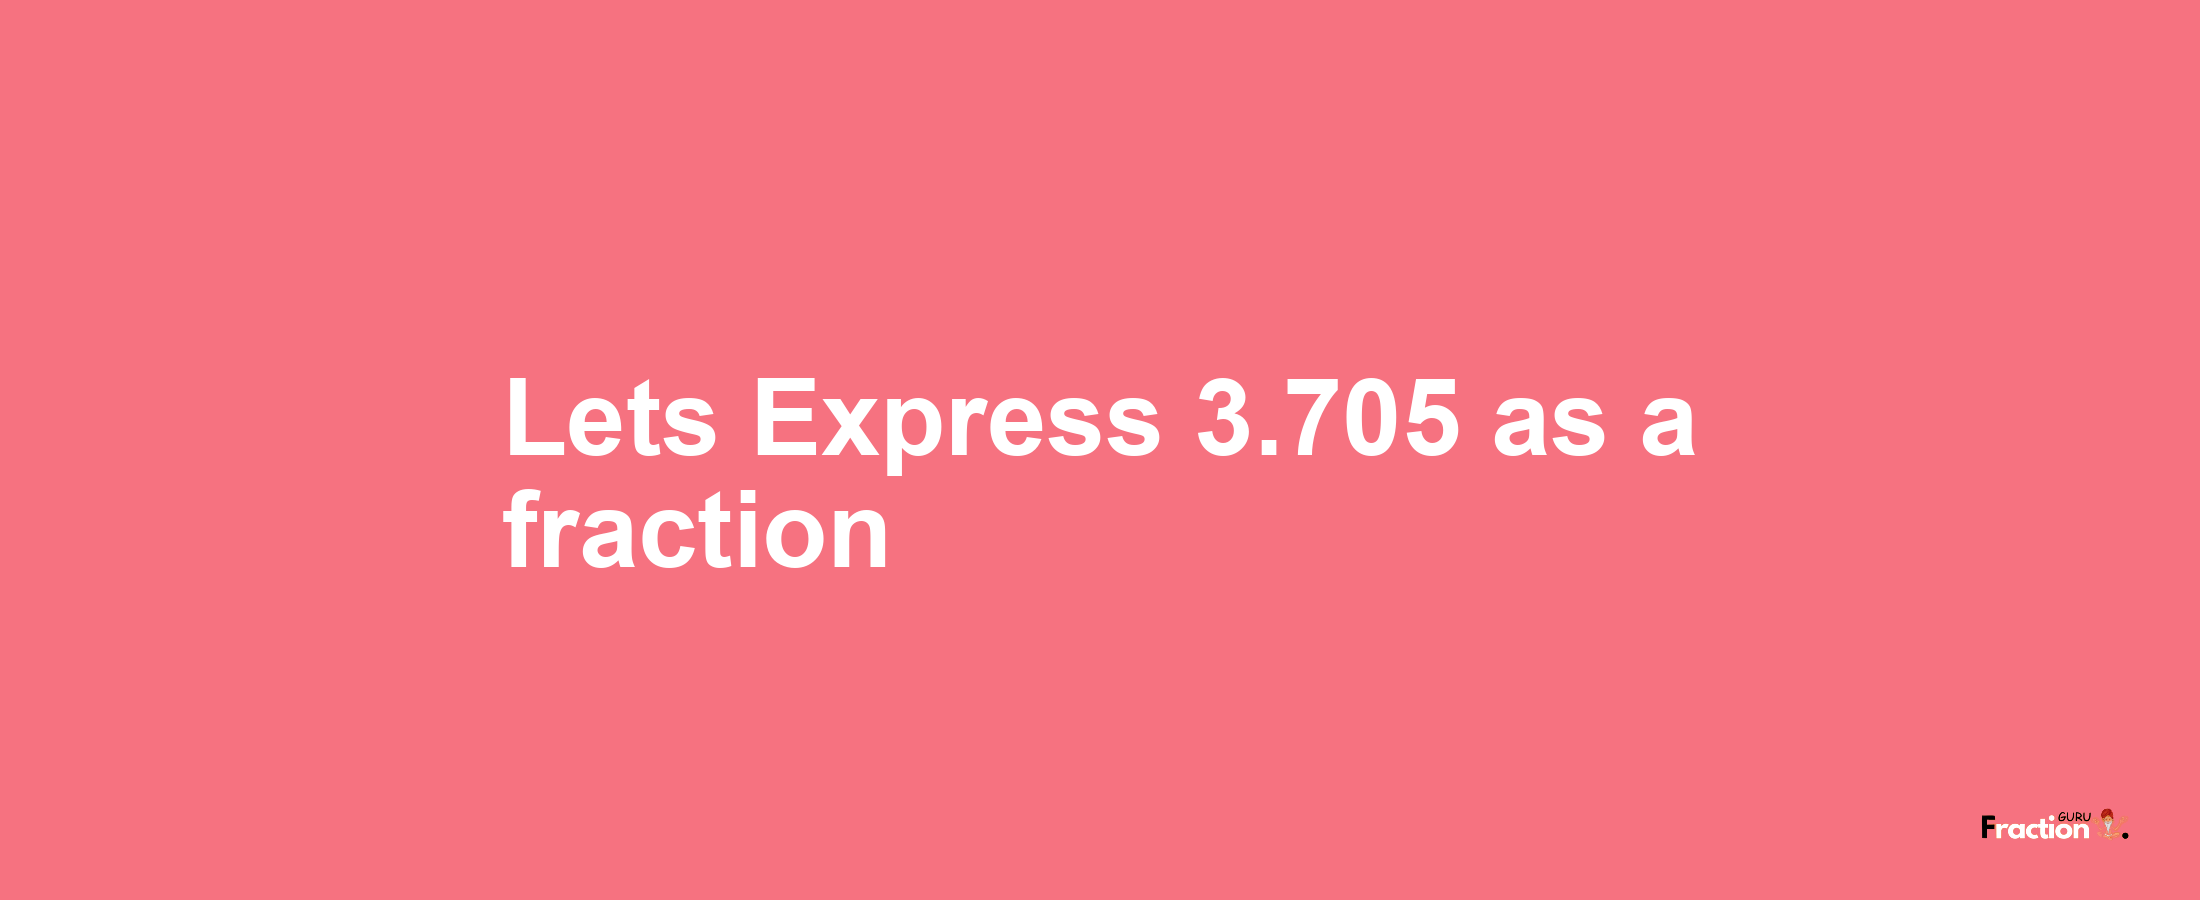 Lets Express 3.705 as afraction